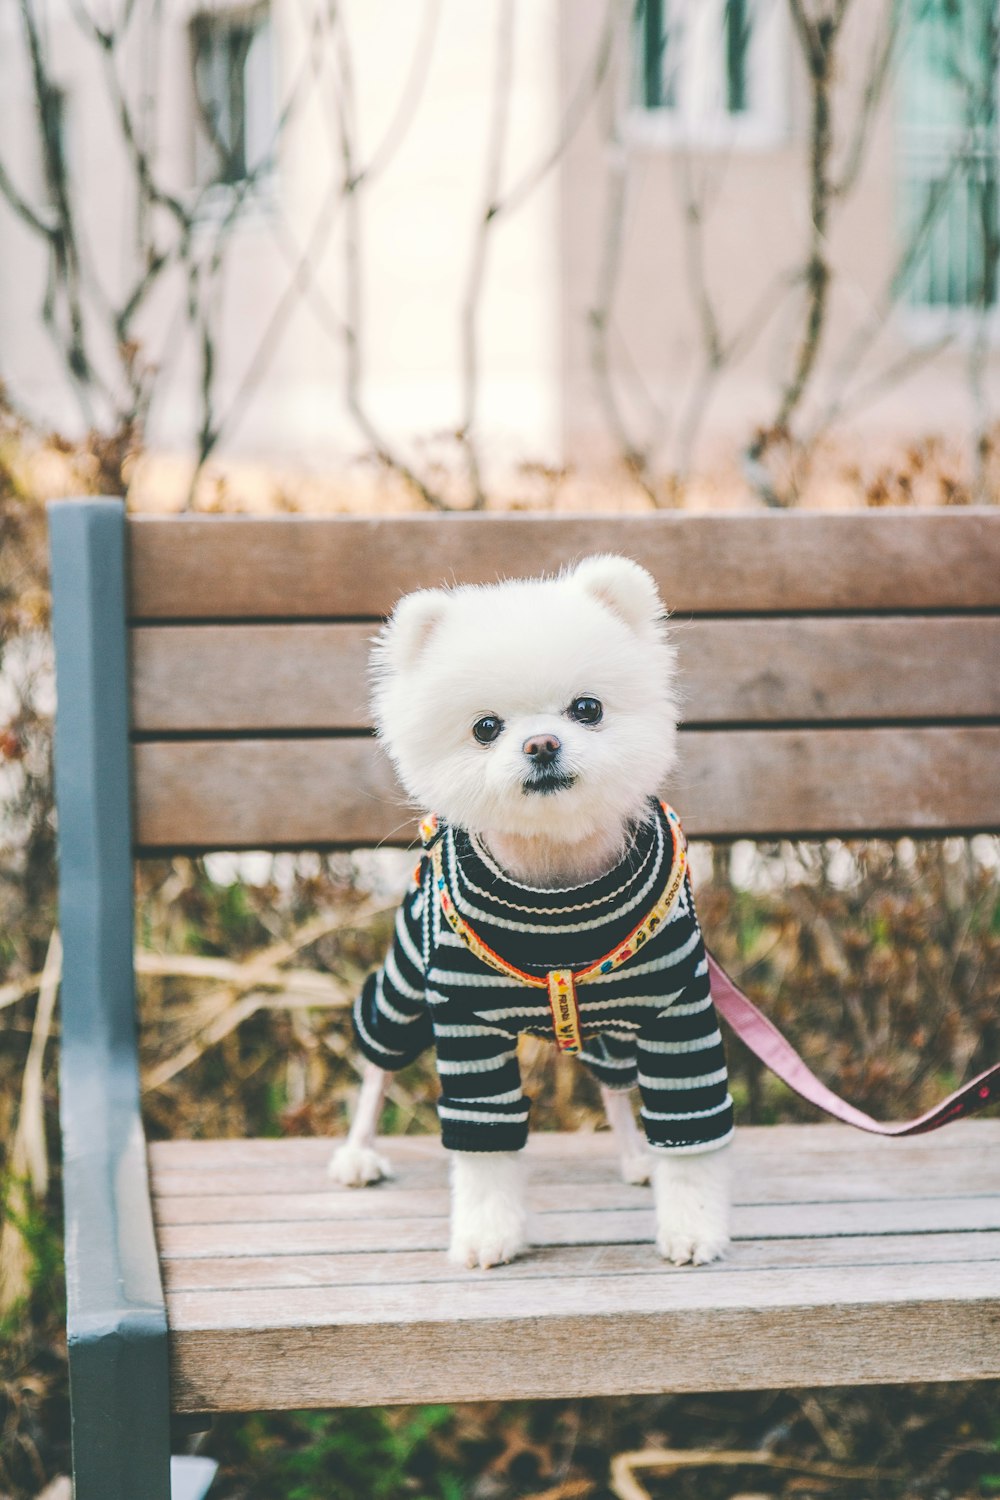 white puppy wearing black and white striped shirt standing on park bench